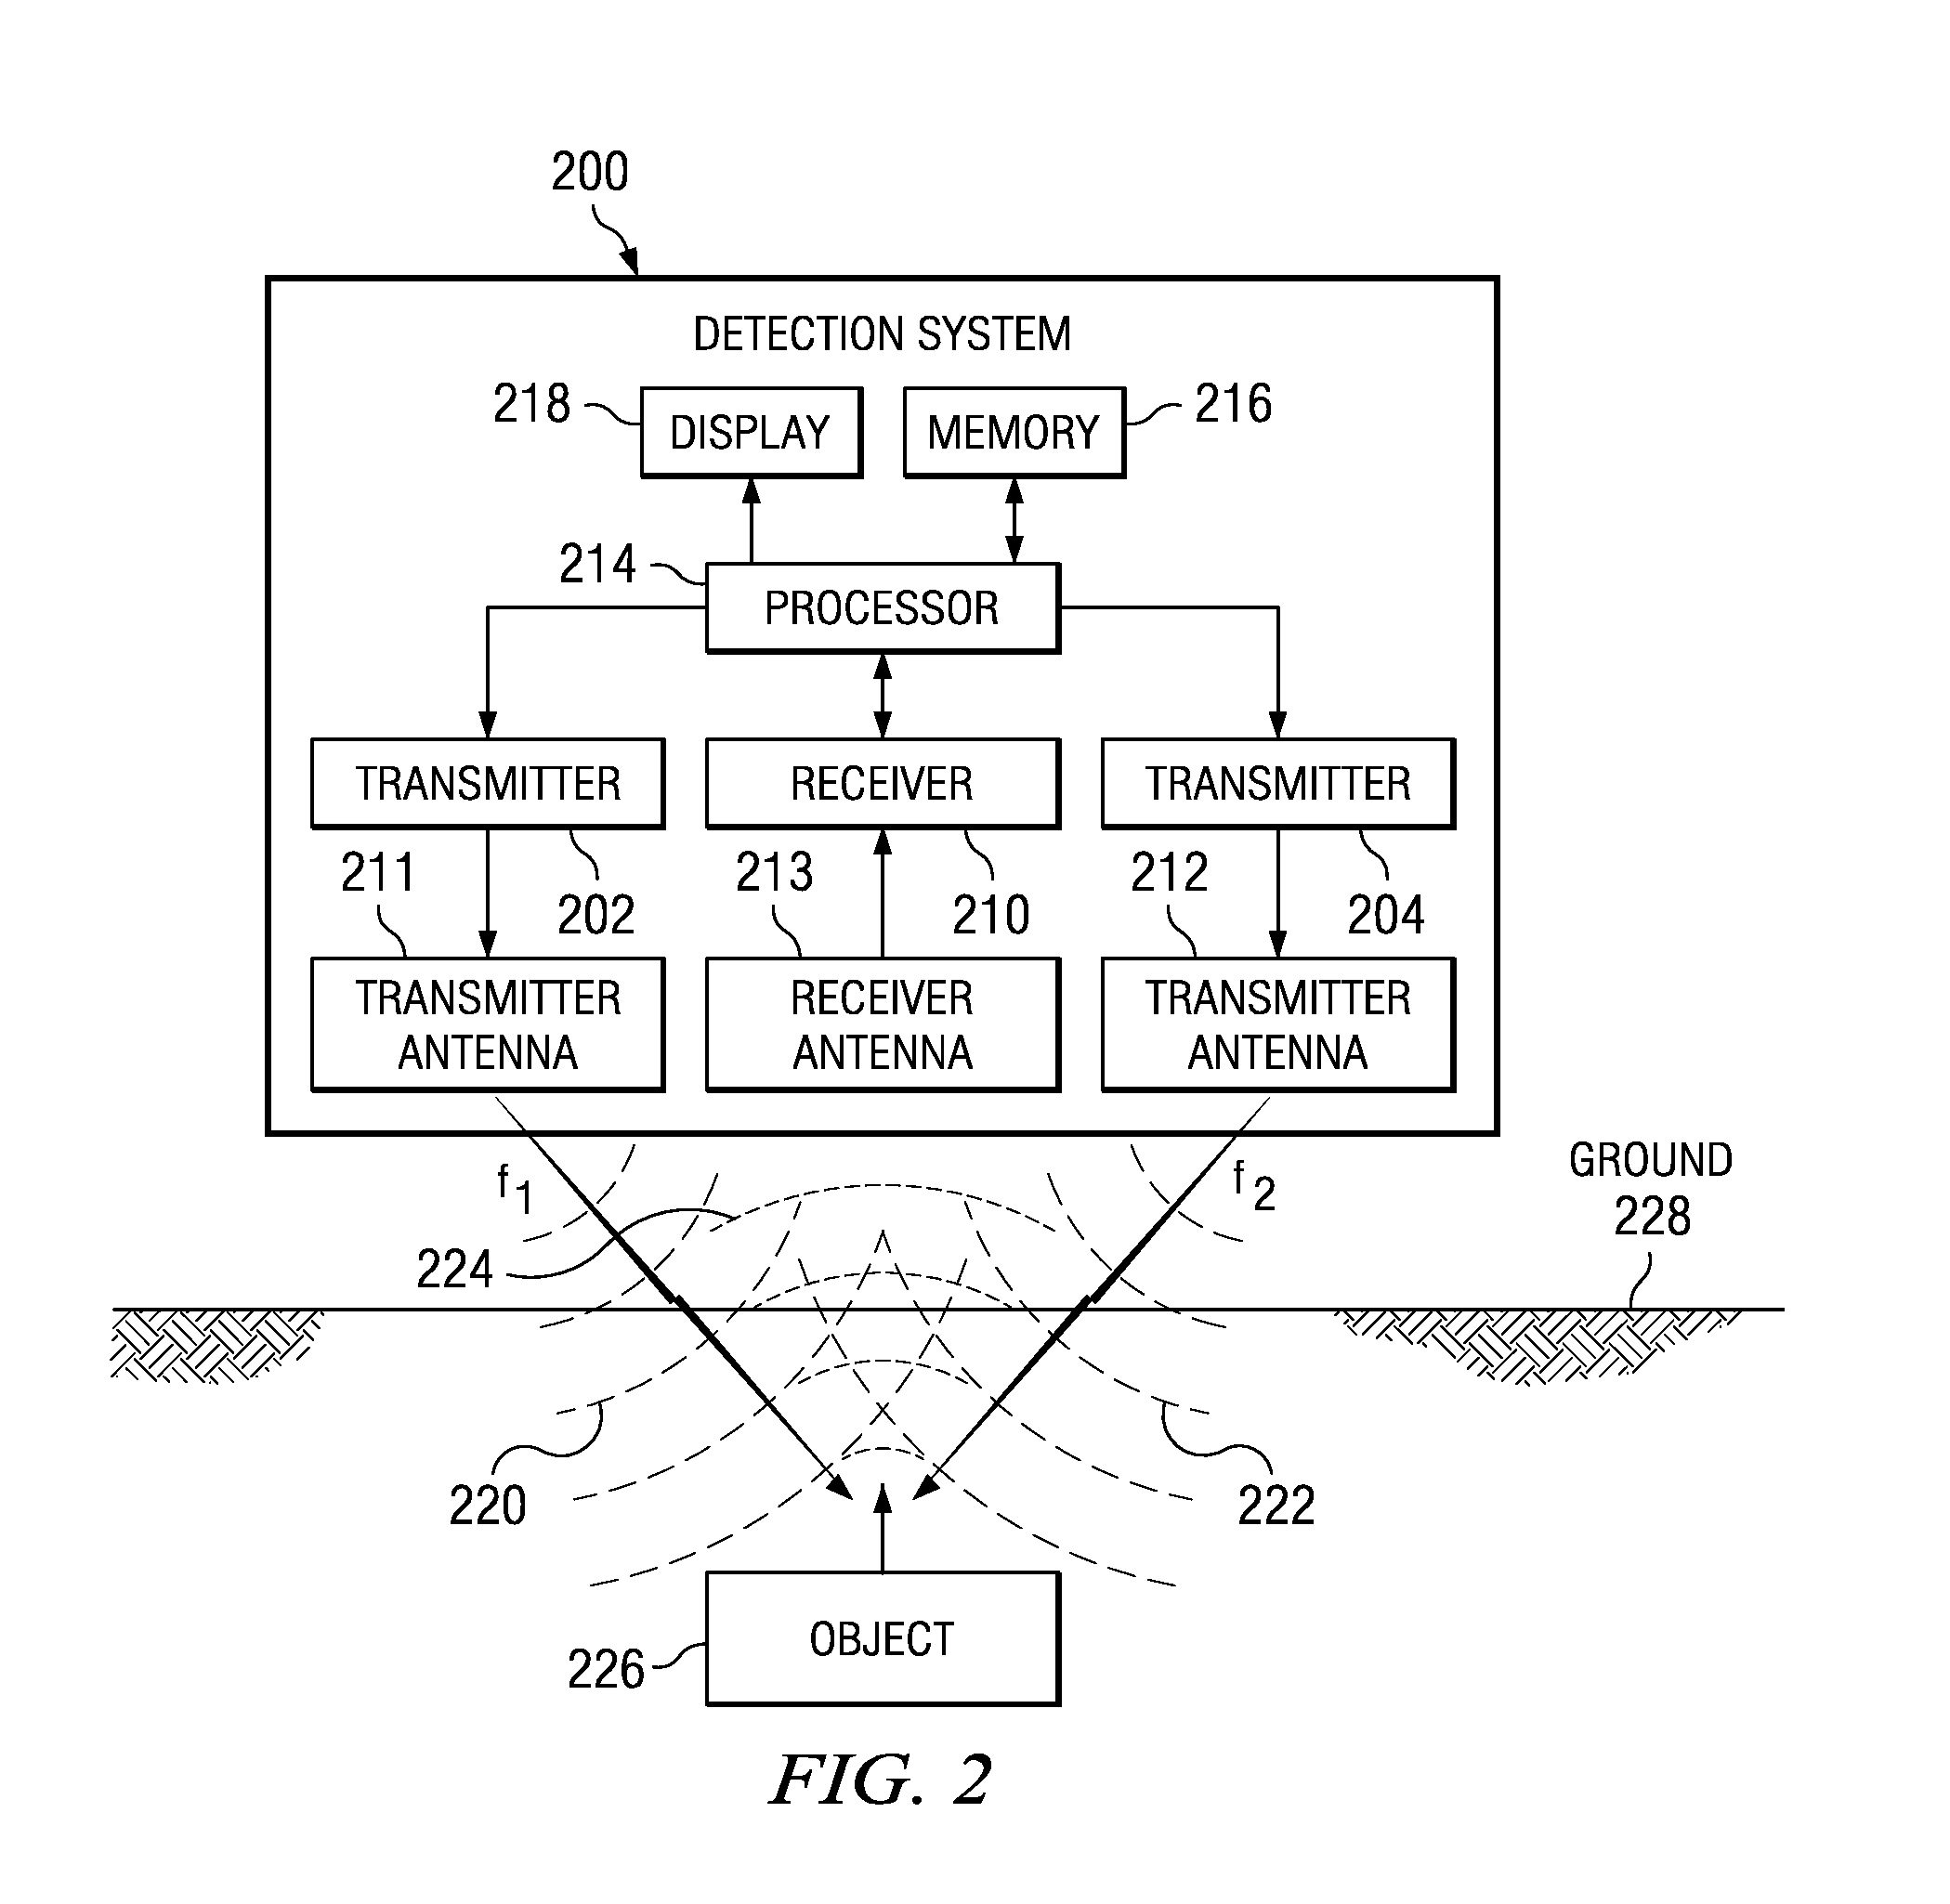 Method and apparatus for using collimated and linearly polarized millimeter wave beams at brewster's angle of incidence in ground penetrating radar to detect objects located in the ground